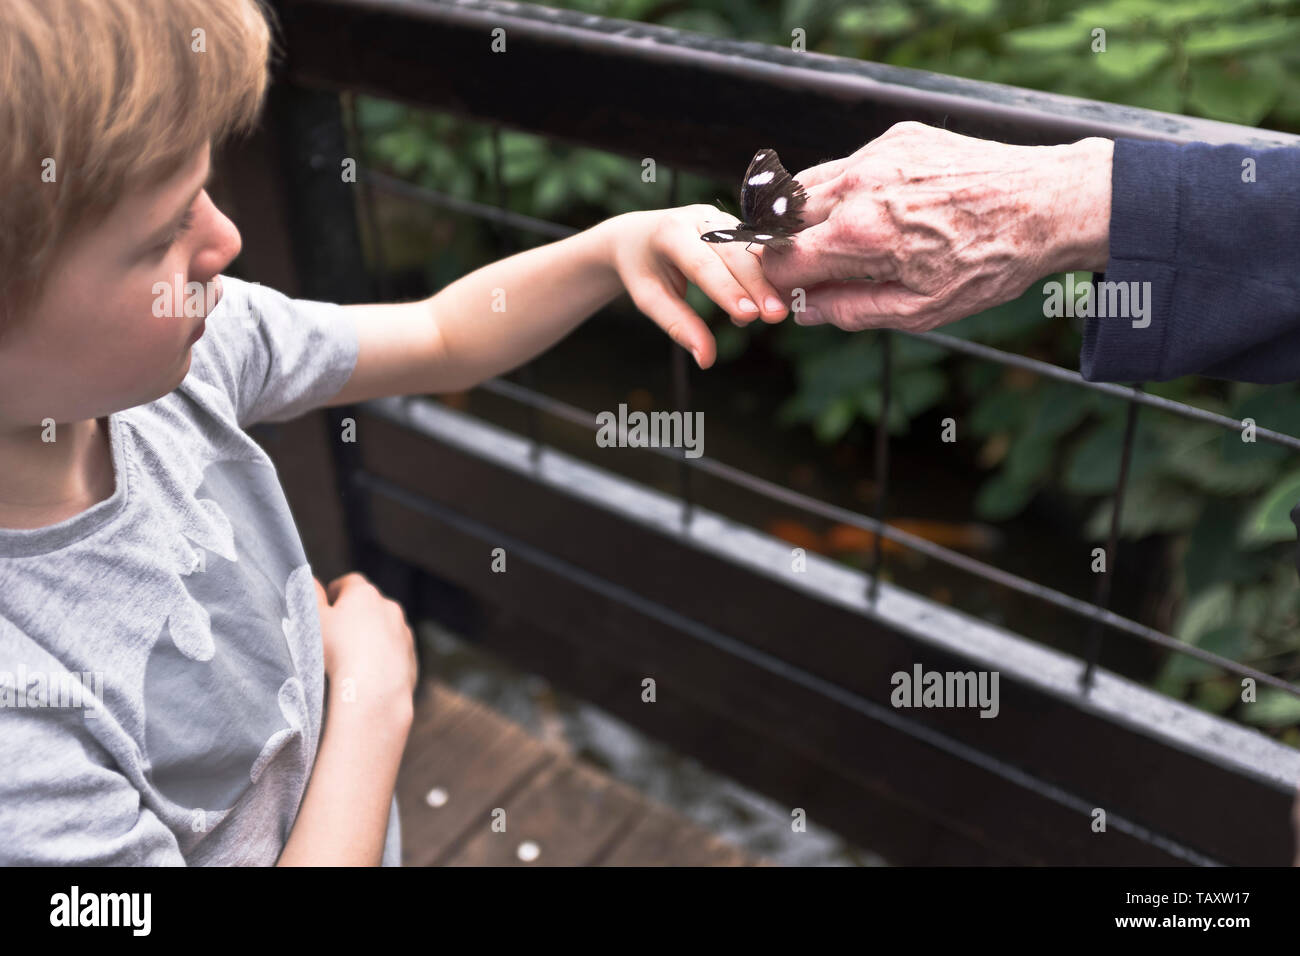 dh Tropical World ROUNDHAY PARK LEEDS Child with butterfly on hand Stock Photo